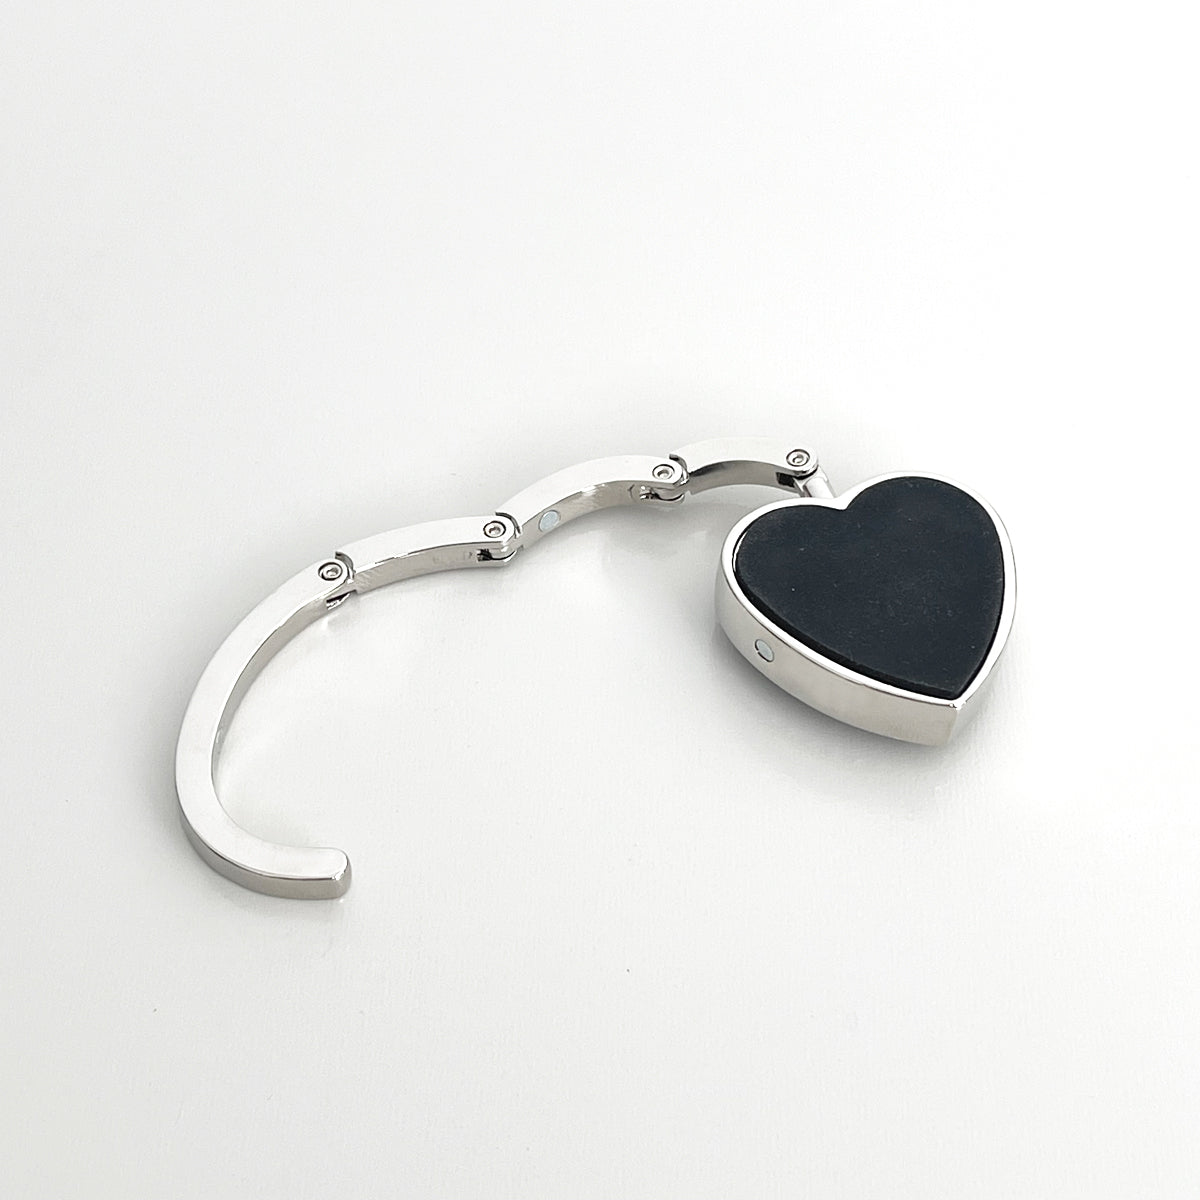 Wrapables Heart Shaped Purse Hook Hanger with Rhinestones